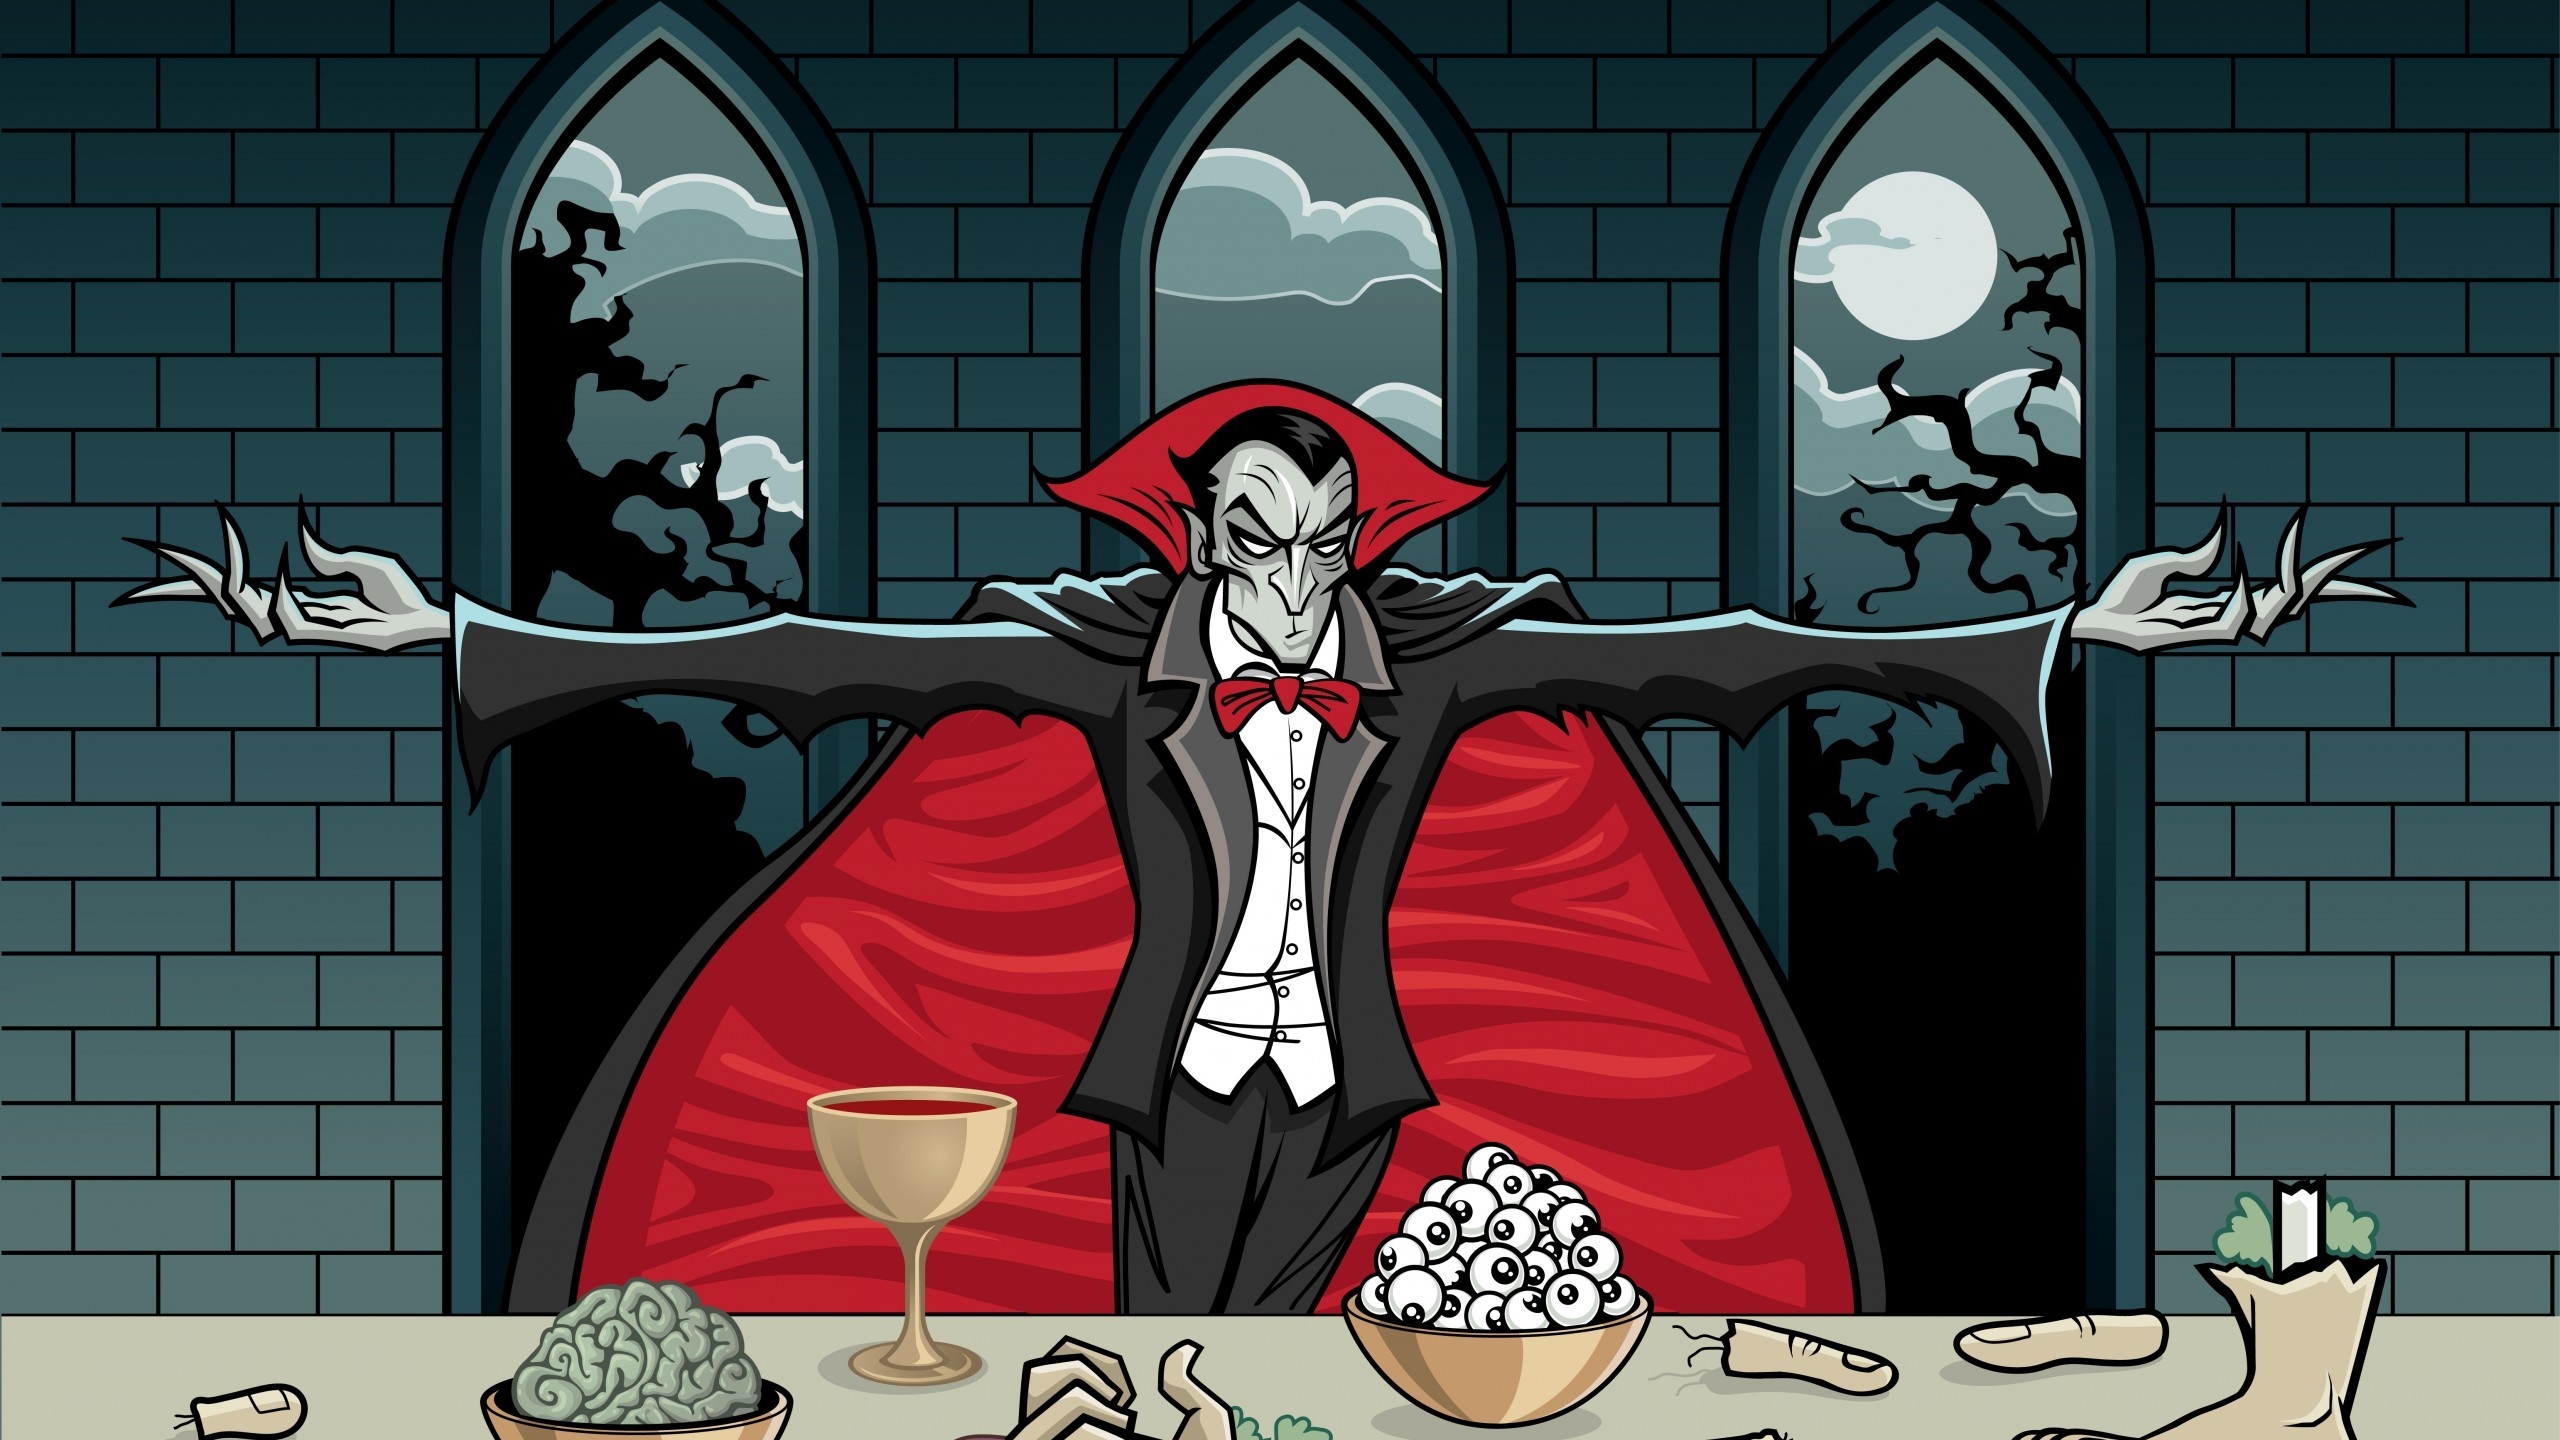 Dracula Count for 2560x1440 HDTV resolution